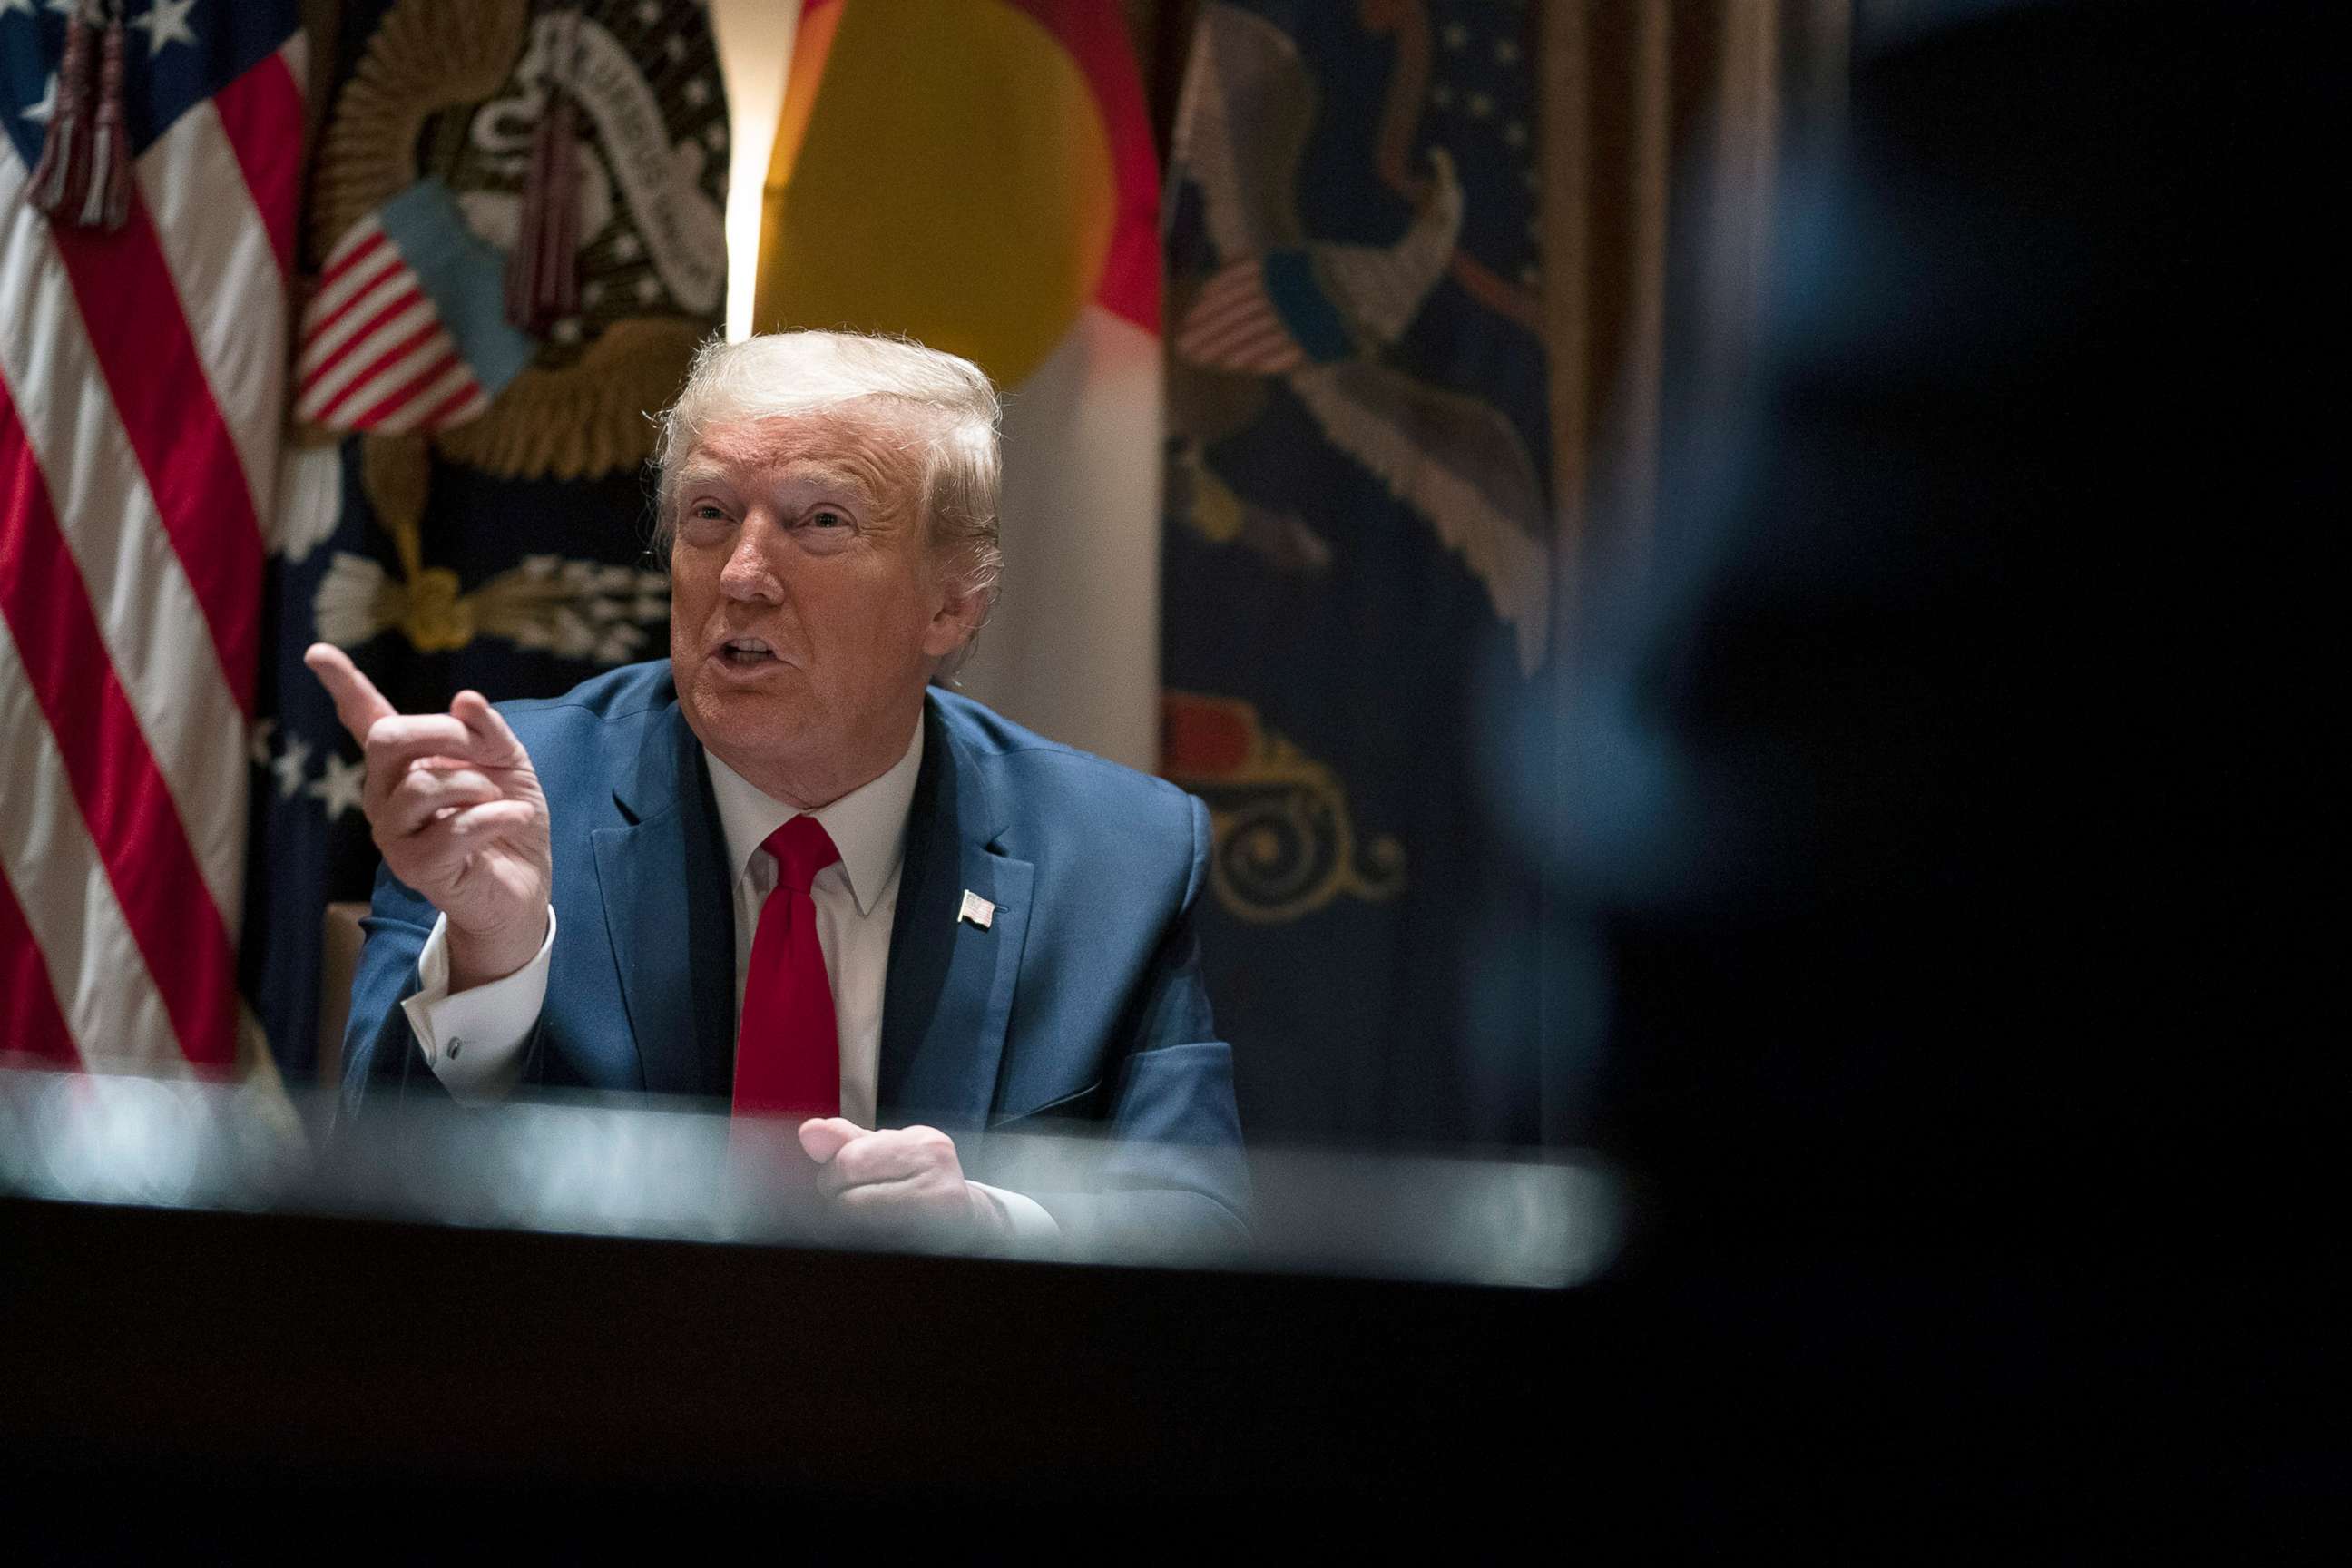 PHOTO: President Donald Trump speaks during a meeting in the Cabinet Room of the White House, May 13, 2020.